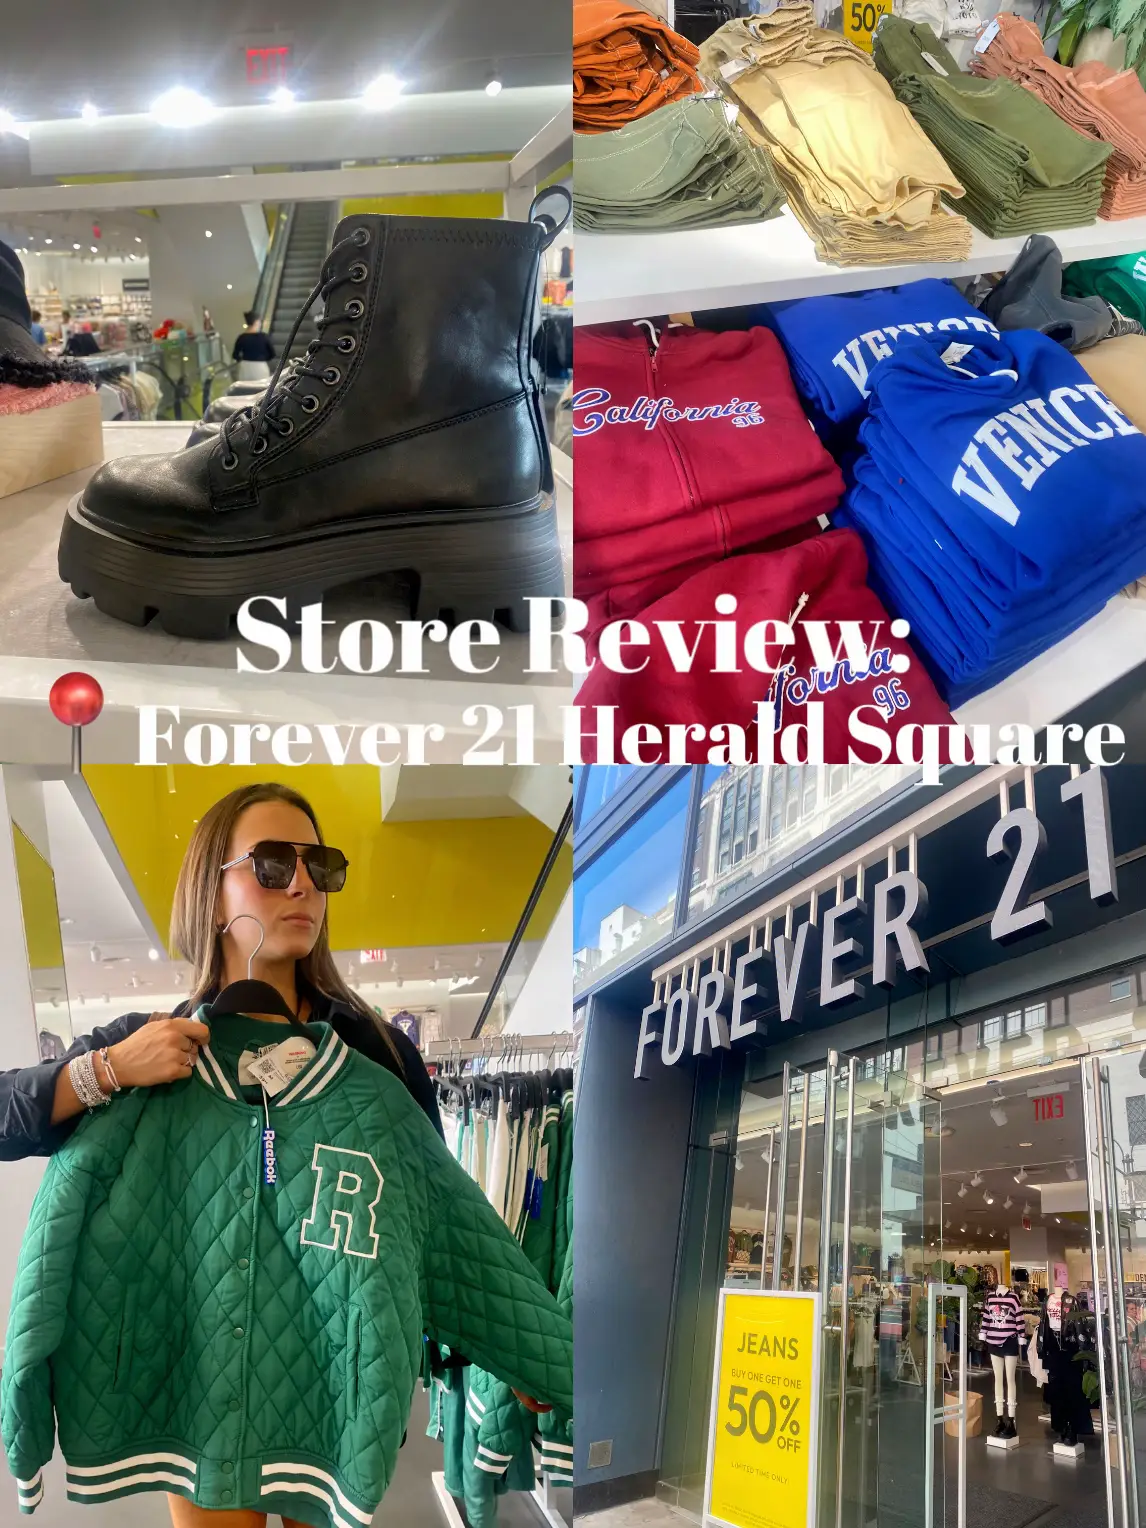 Find Forever 21 on 34th Street in New York City.